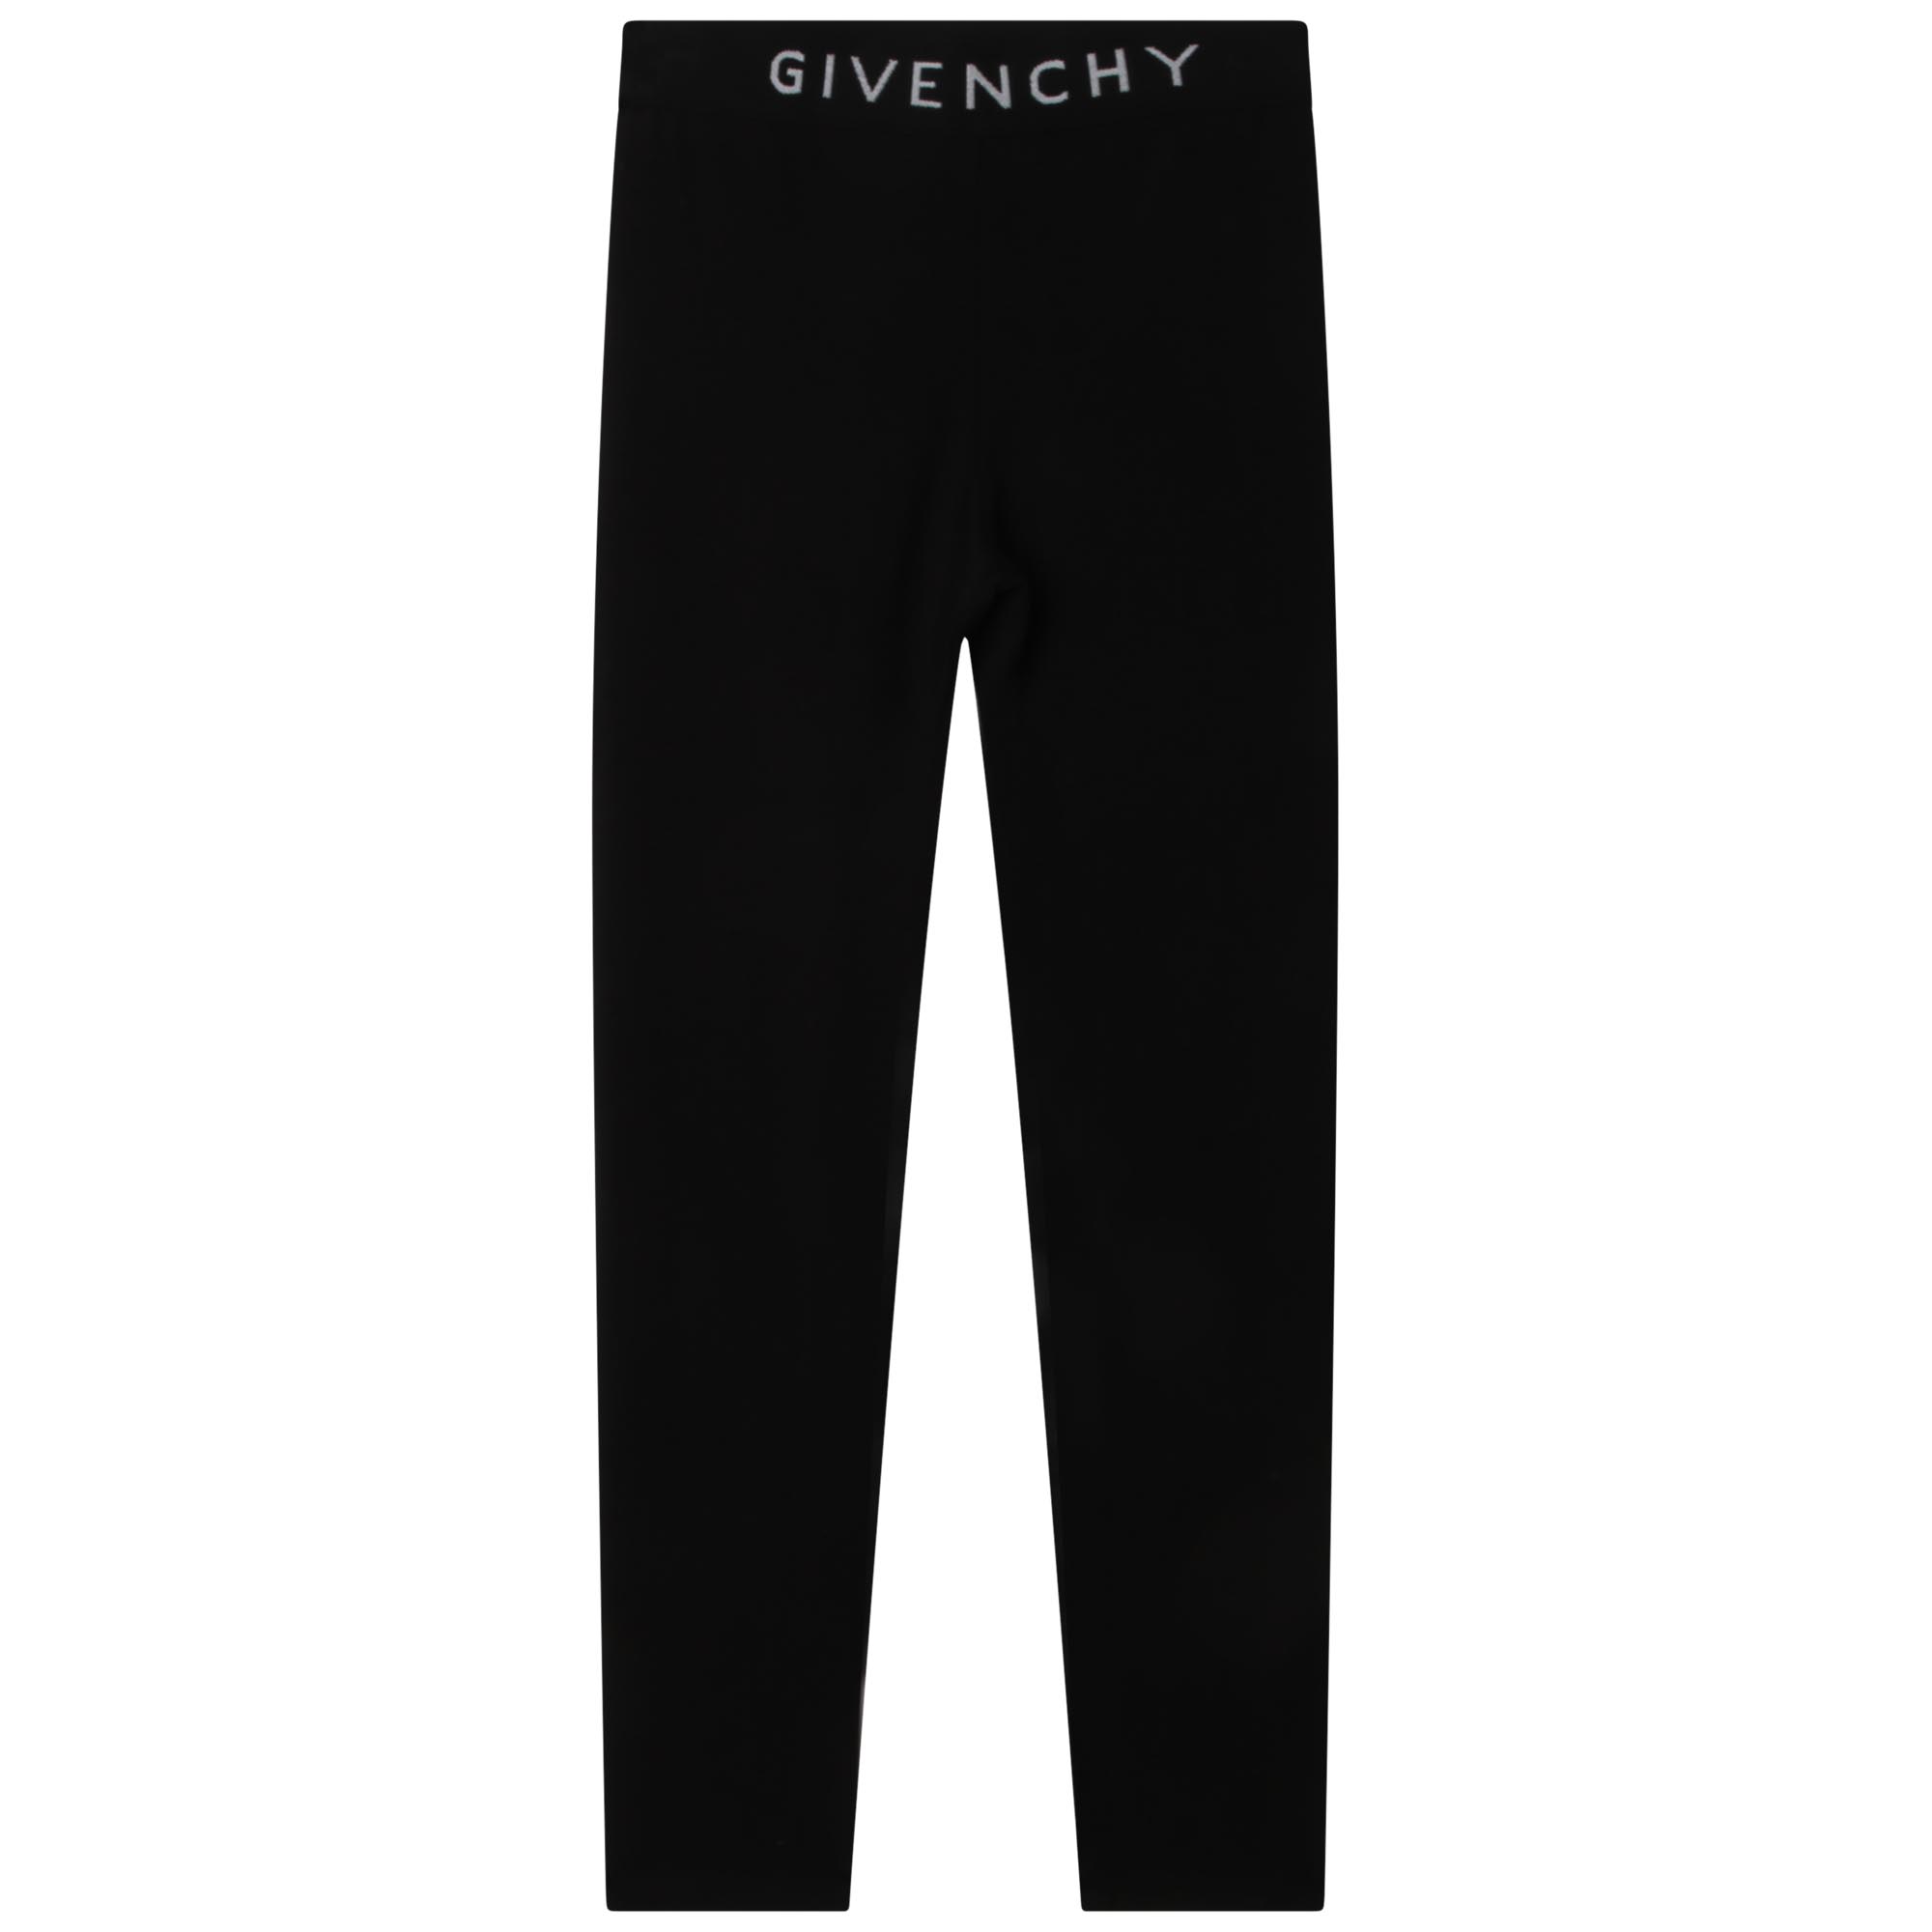 LEGGINGS GIVENCHY Voor